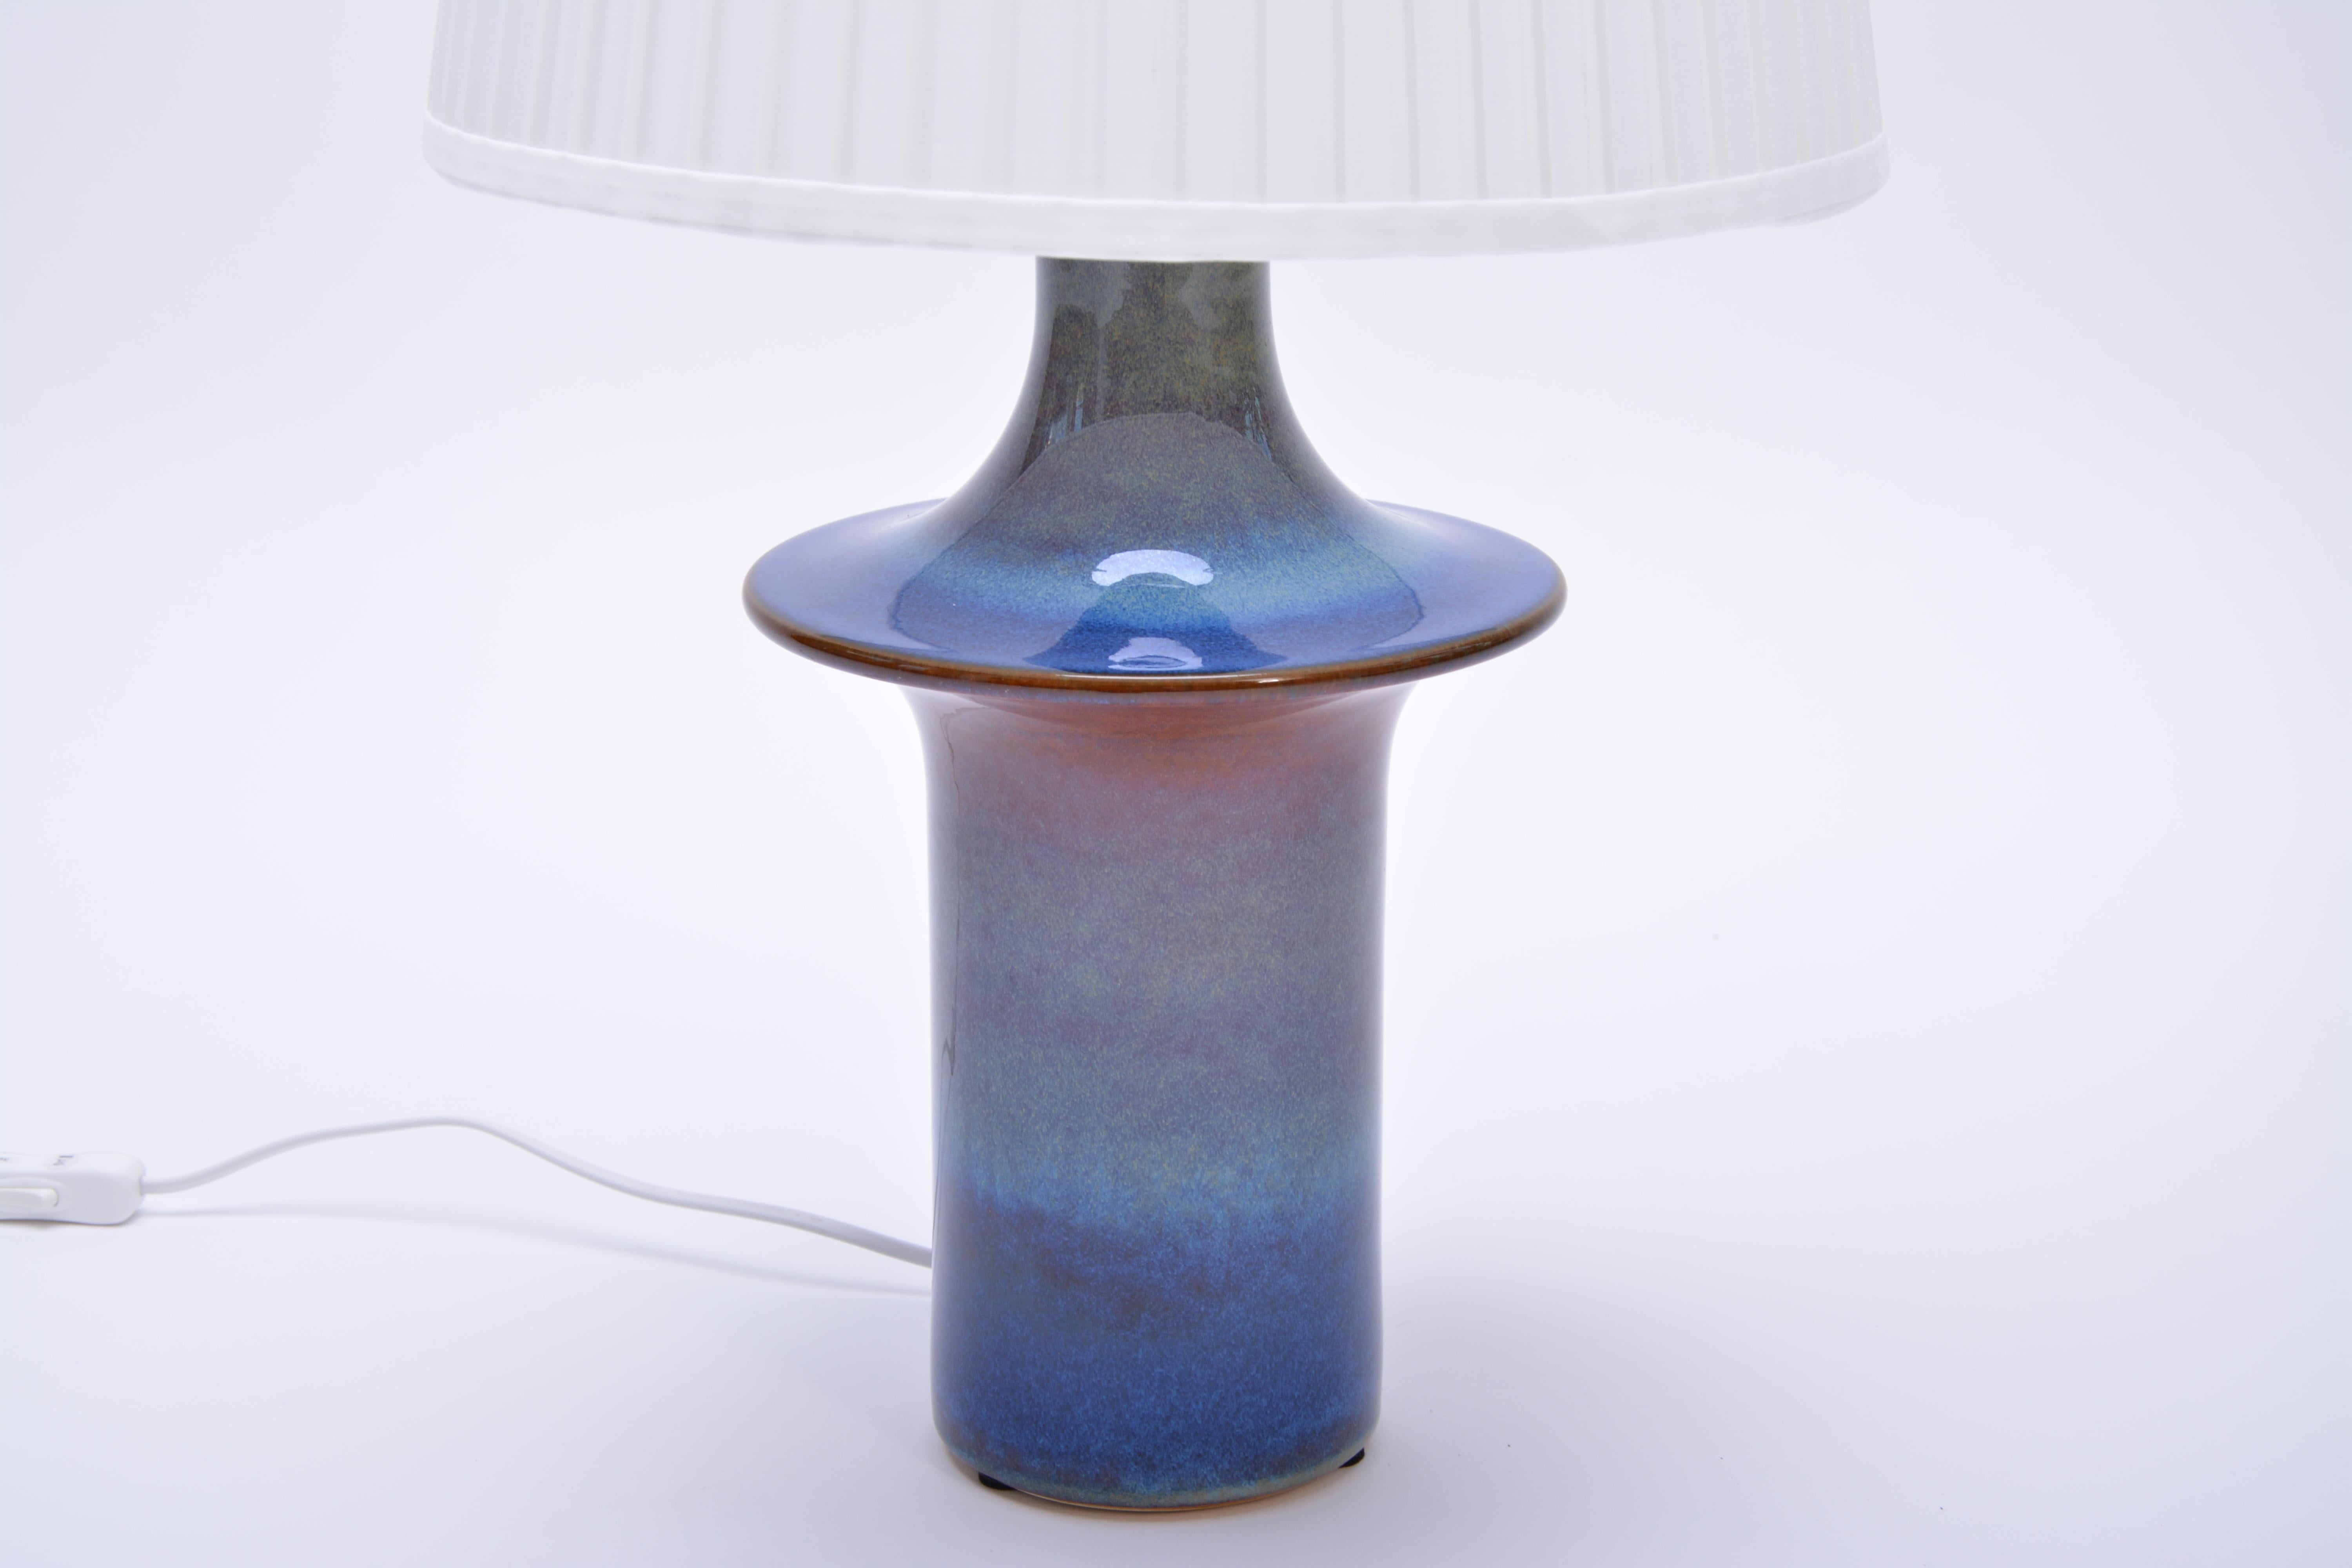 Tall blue Danish Mid-Century Modern Ceramic table lamp by Soholm

Tall blue Danish Mid-Century Modern Ceramic table lamp by Soholm
Table lamp made of stoneware with ceramic glazing in beautiful tones of blue produced by Soholm Stentoj in Denmark in